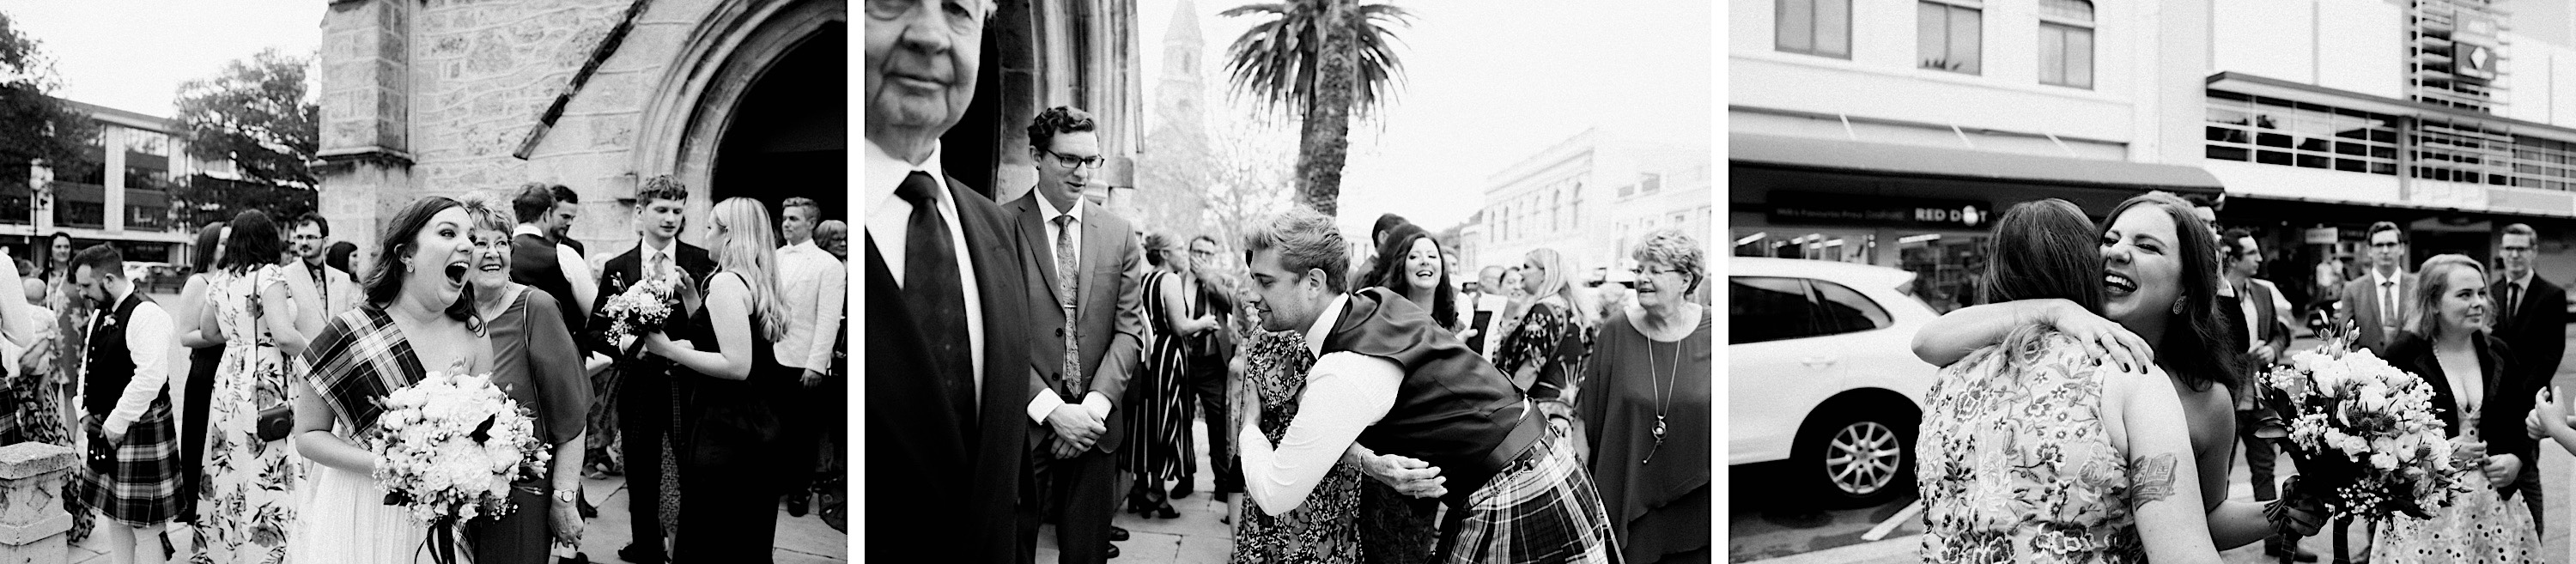 Three black & white Candid Wedding Portraits of guests congratulating the Bride & Groom after their Wedding Ceremony at St John's Anglican Church.